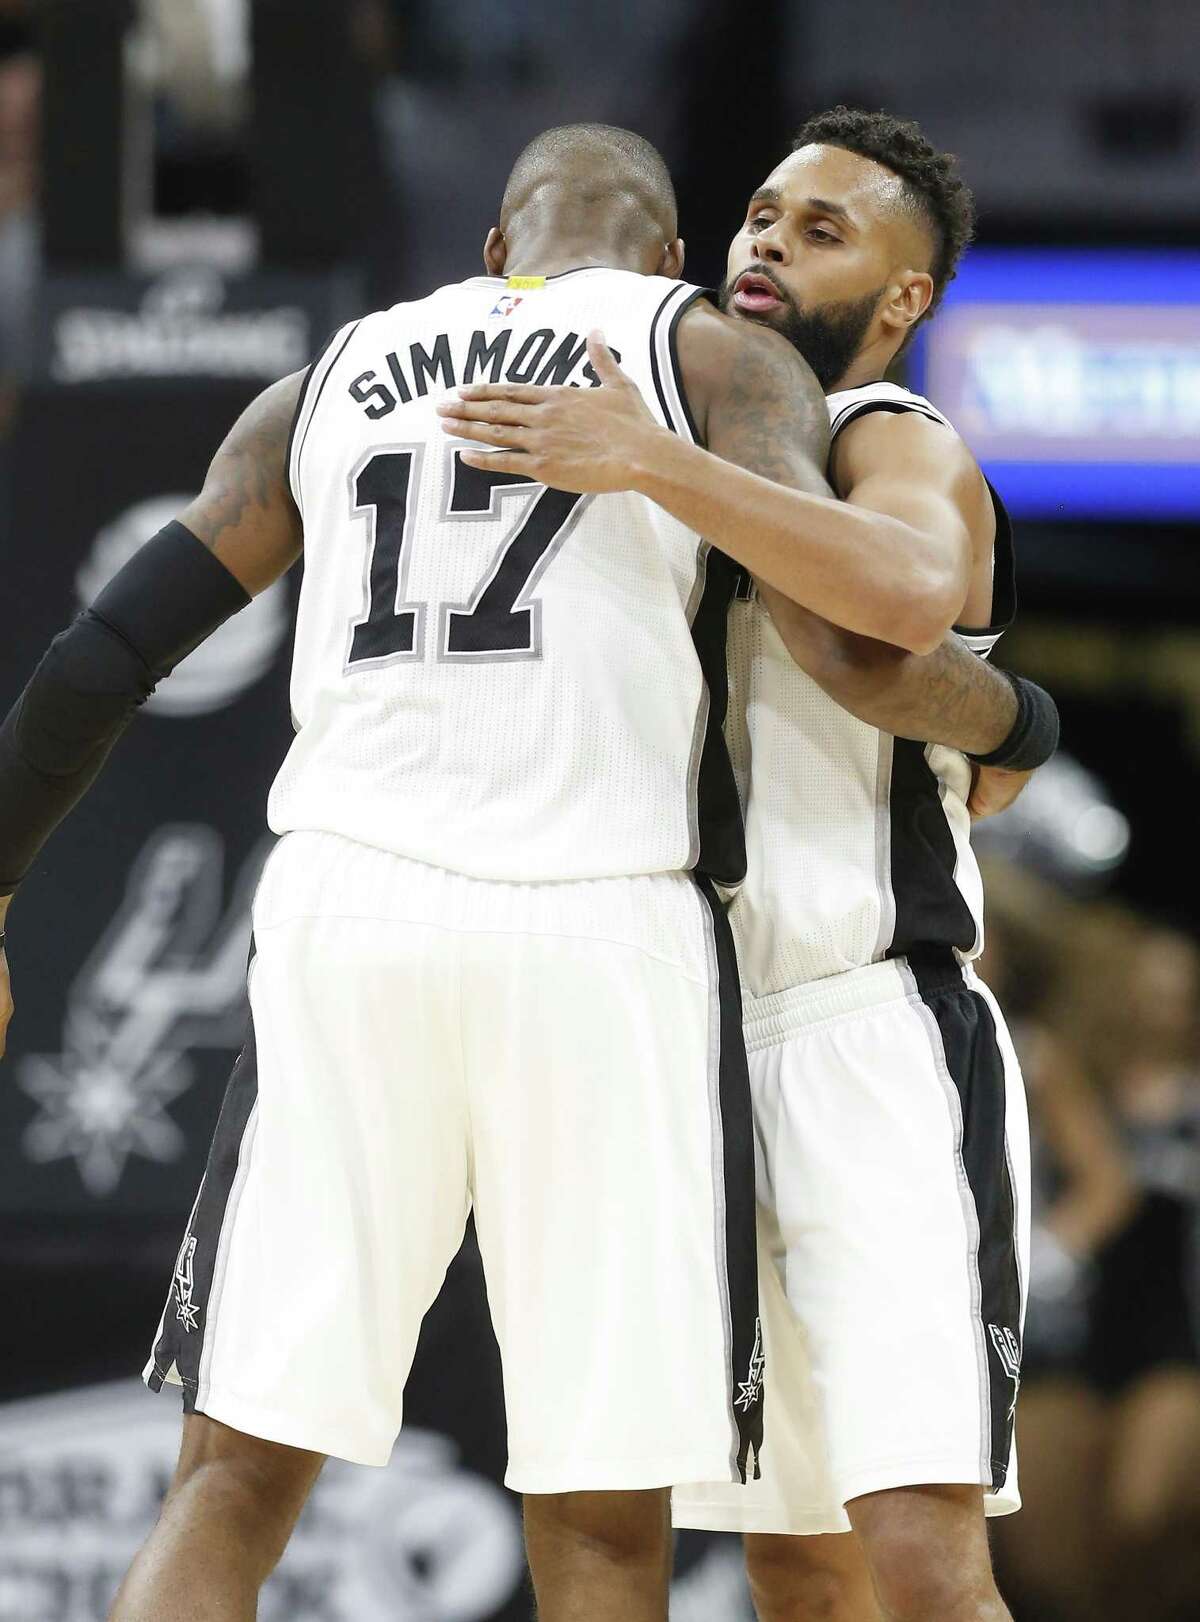 Spurs' Patty Mills (08) gets a hug from teammate Jonathon Simmons (17) after hitting a three-pointer in overtime against the Memphis Grizzlies during their game at the AT&T Center on Tuesday, Apr. 4, 2017. Spurs defeated the Grizzlies in overtime, 95-89. (Kin Man Hui/San Antonio Express-News)